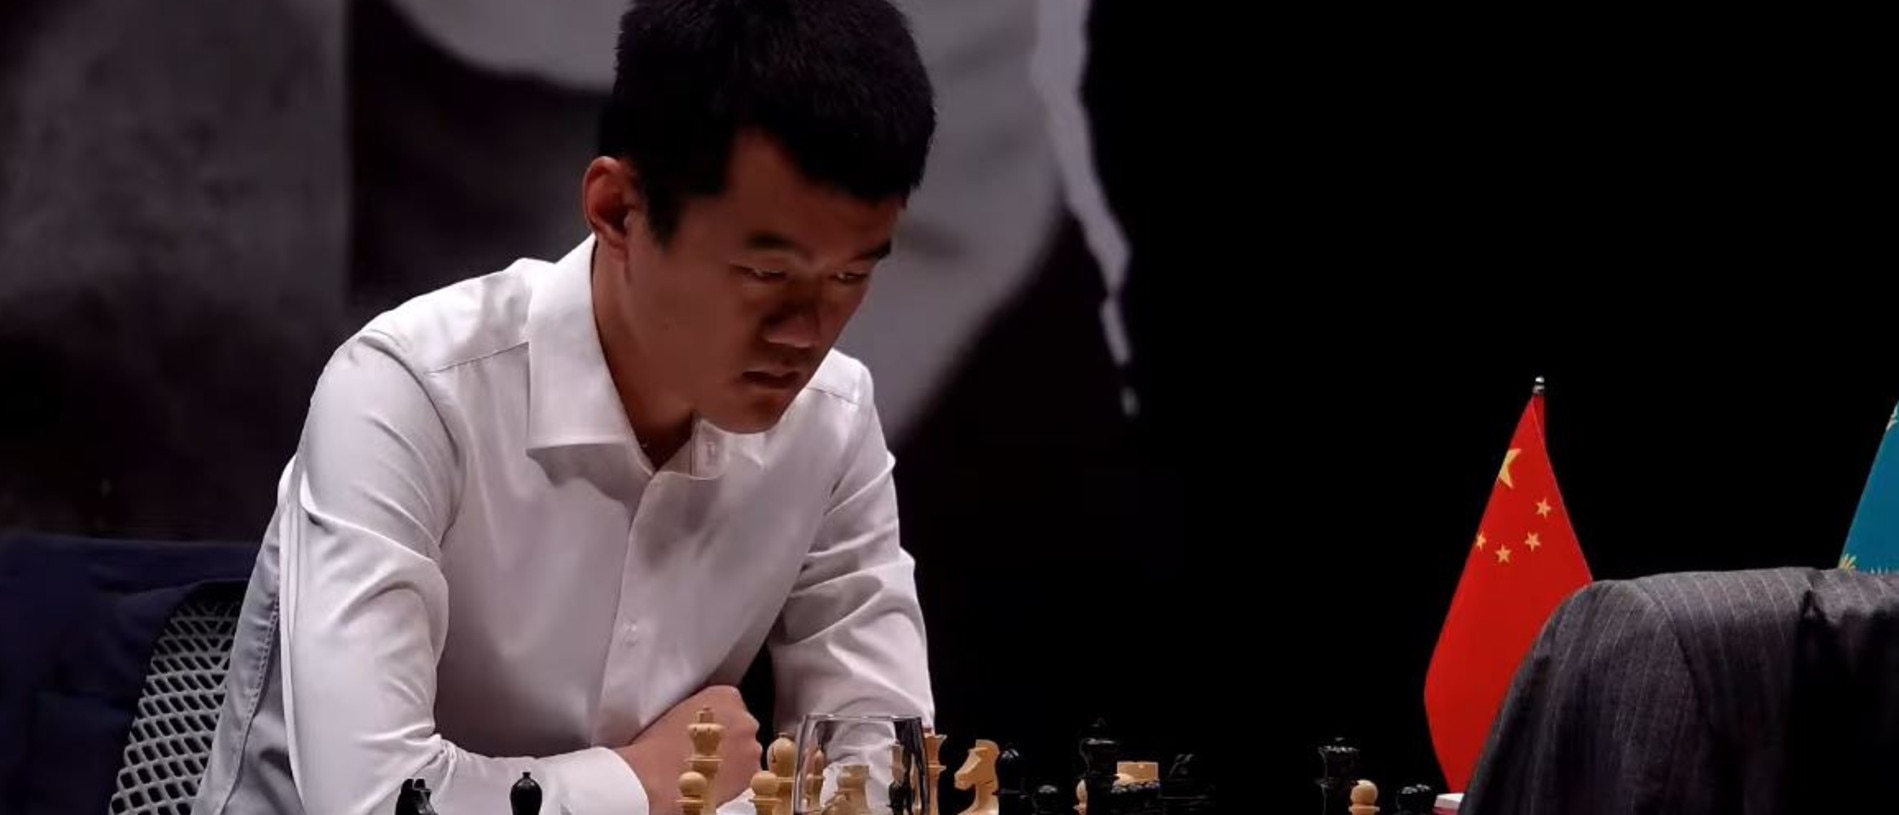 A tough loss following a brave opening decision by Ding Liren today.  #NepoDing